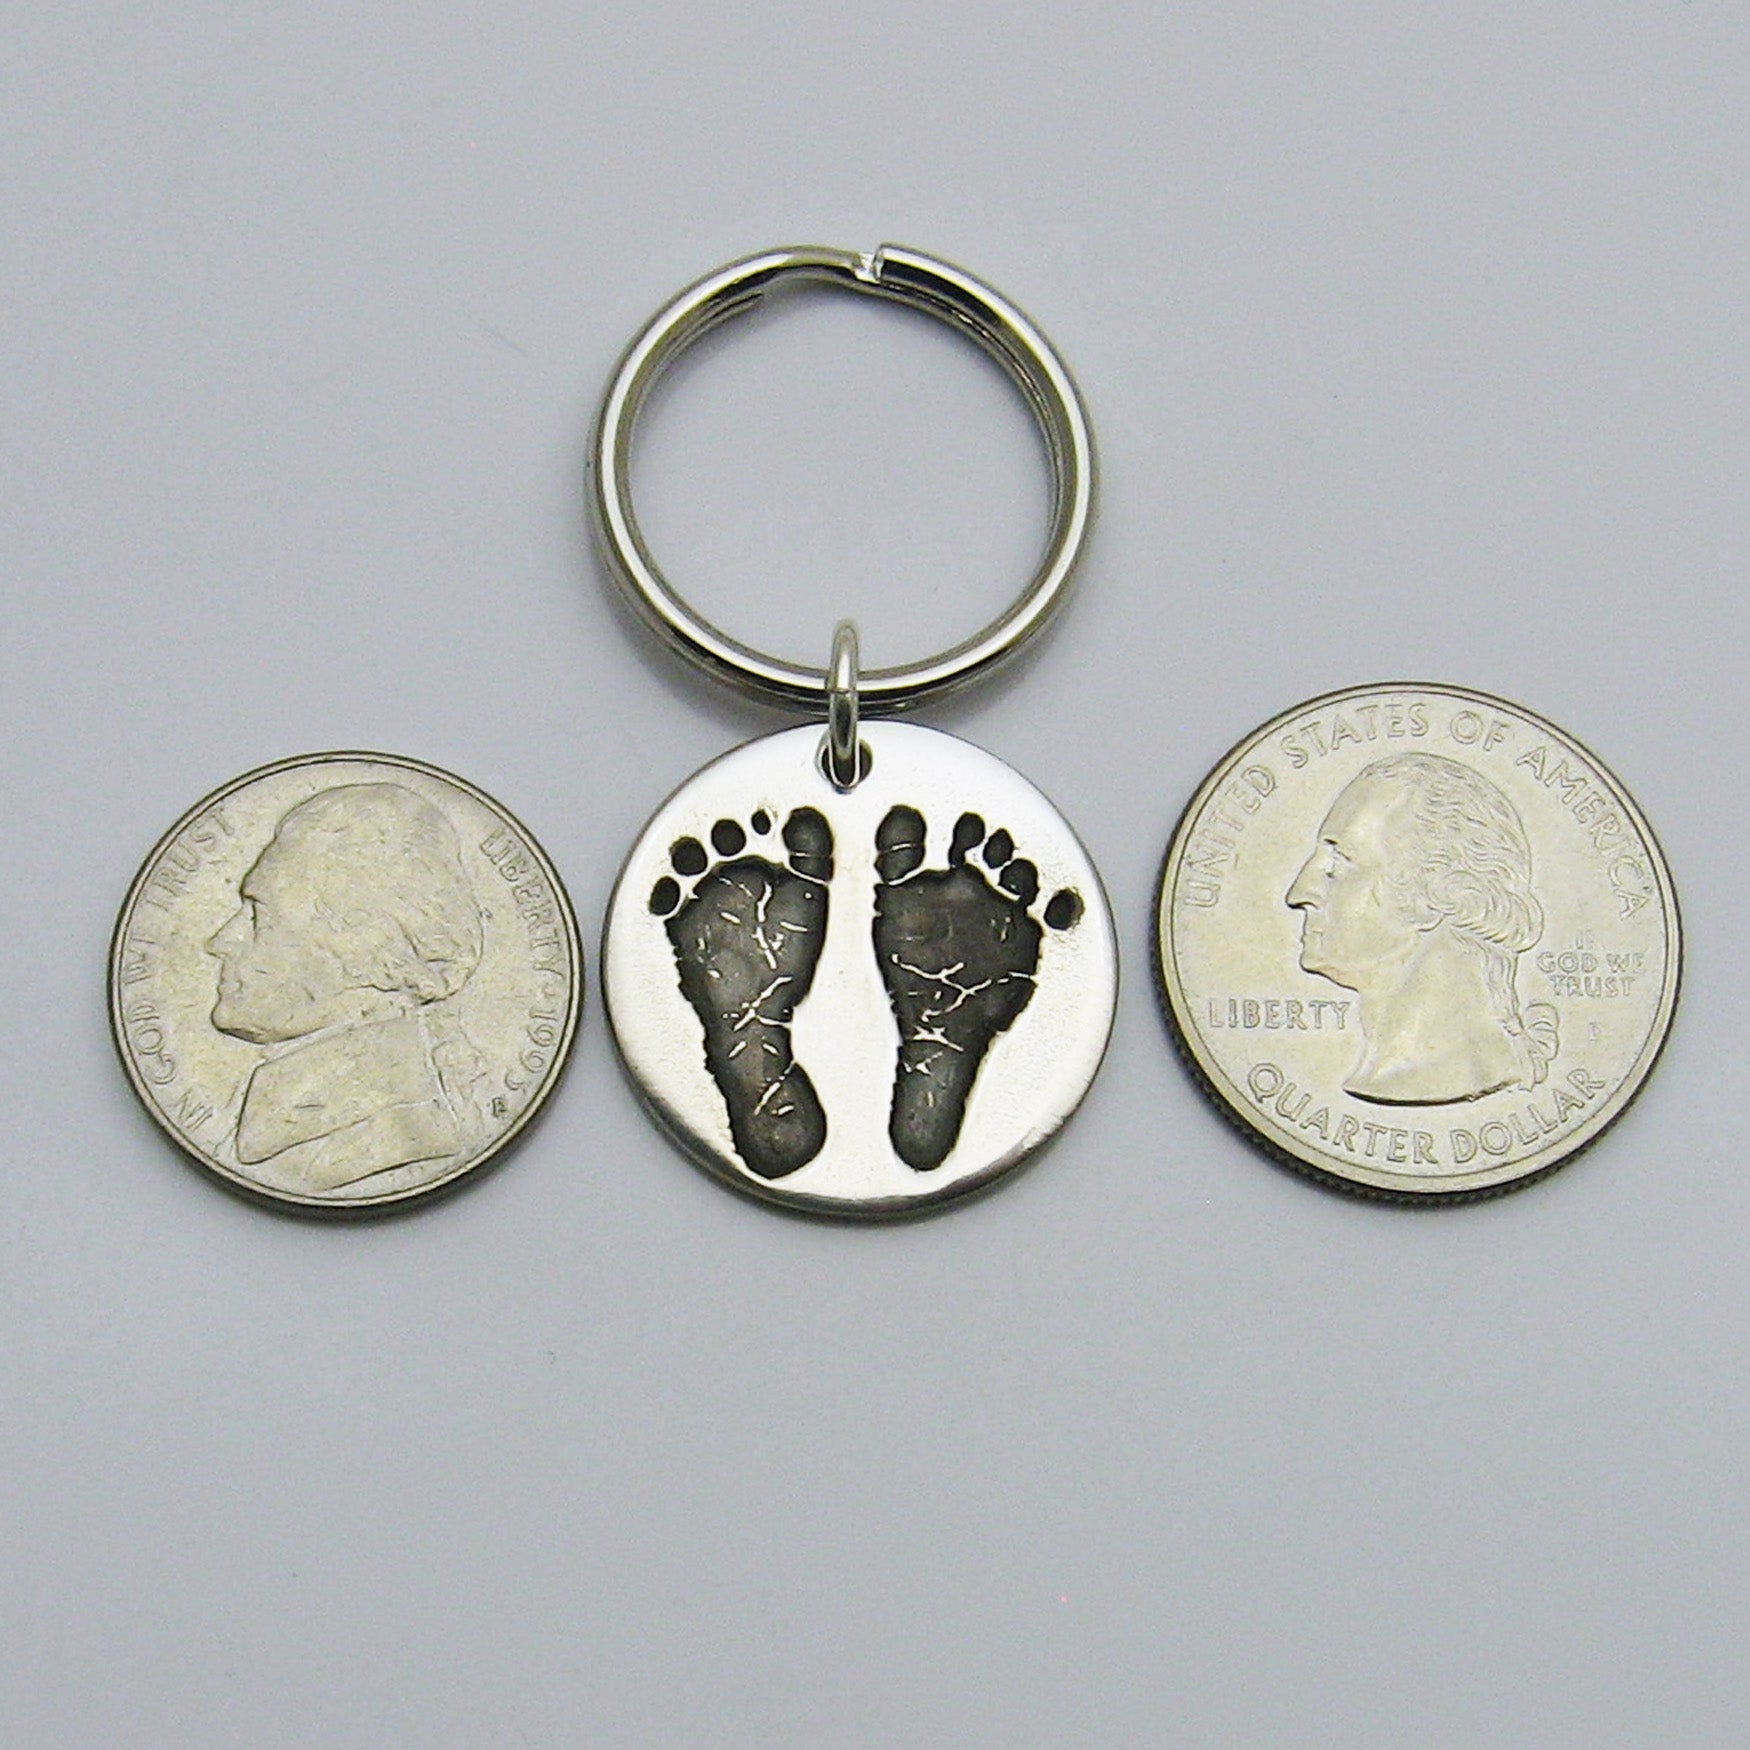 Circle Footprints Keychain next to nickel and quarter for size reference